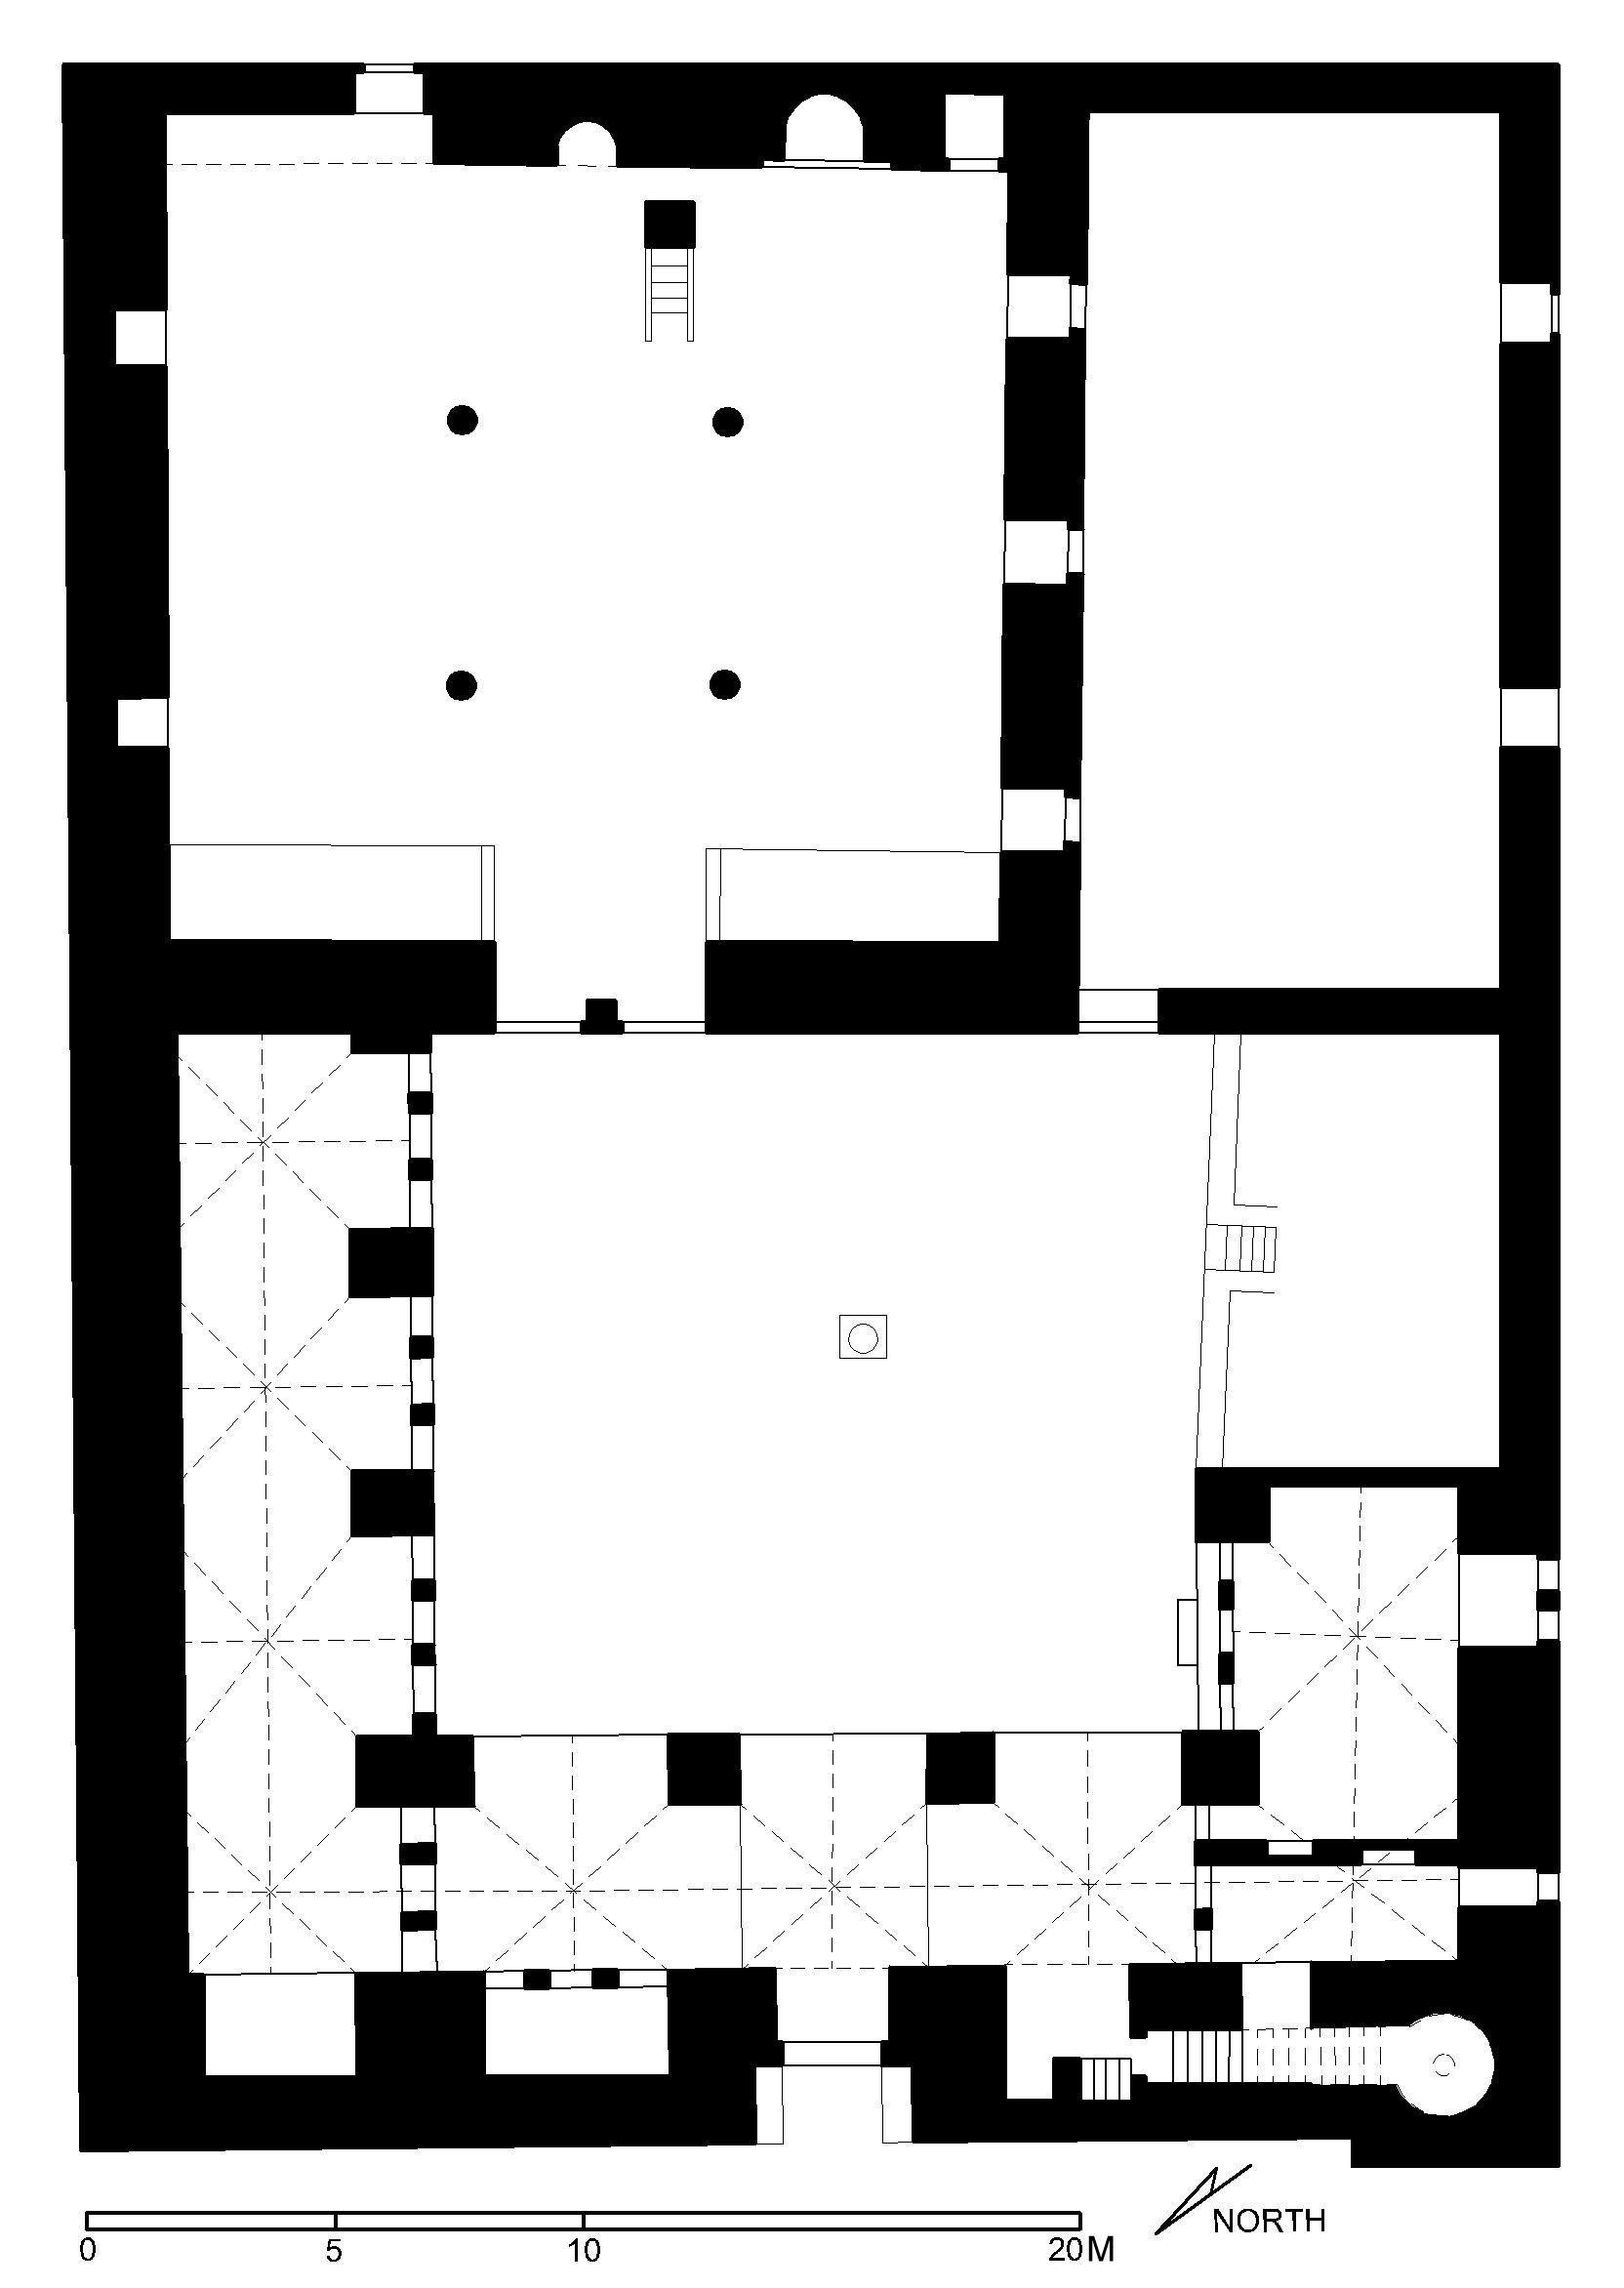 Jami' al-'Ahmar - Floor plan of mosque (after Meinecke) in AutoCAD 2000 format. Click the download button to download a zipped file containing the .dwg file. 